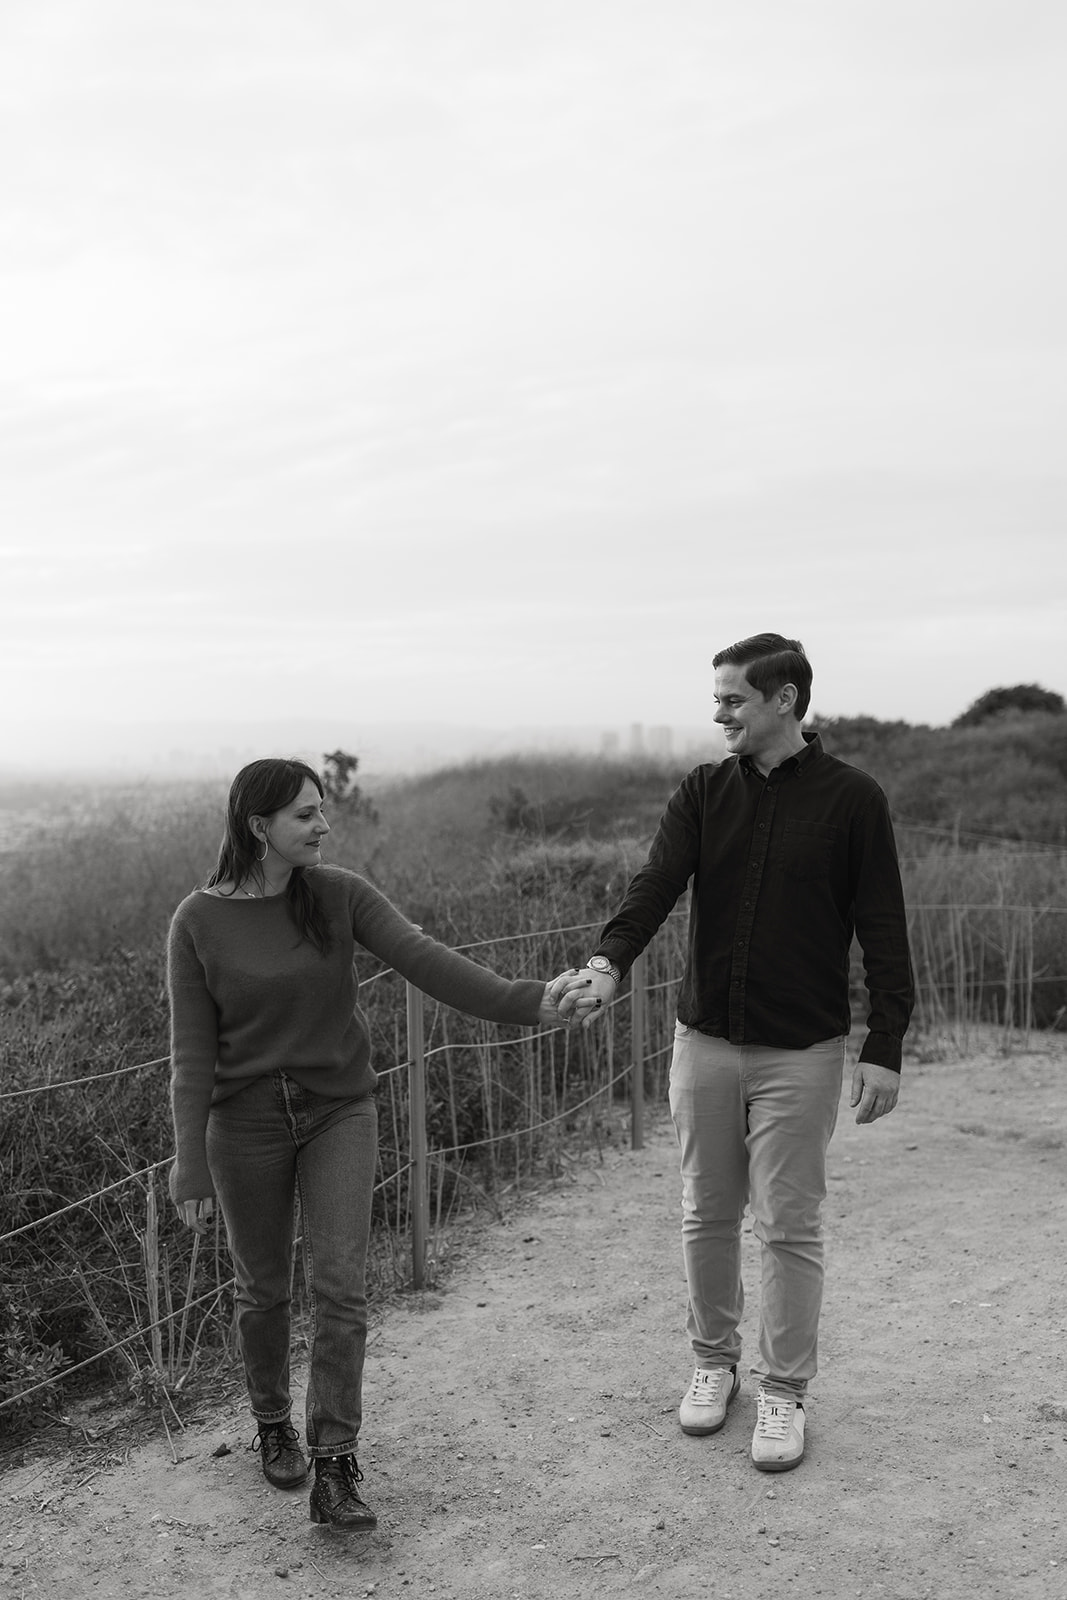 southern california socal baldwin hills park engagement couples poses ideas couples pose scenic photoshoot hillside pics